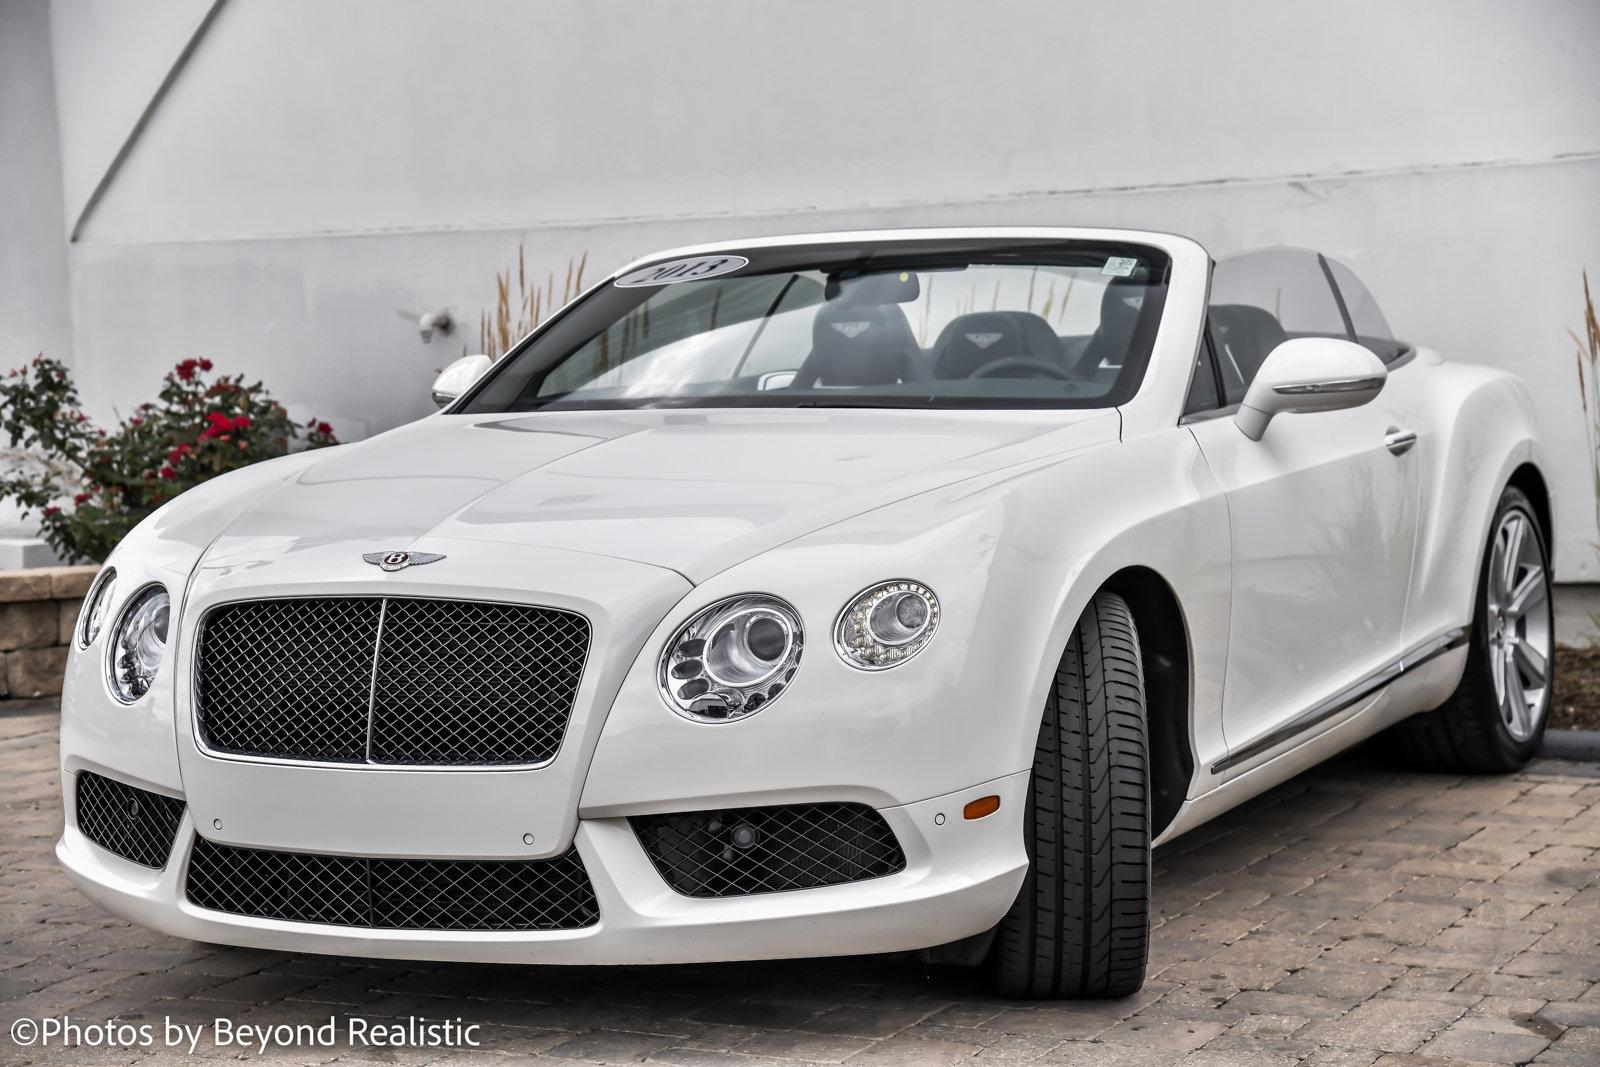 Used 2013 Bentley Continental GT V8  | Downers Grove, IL